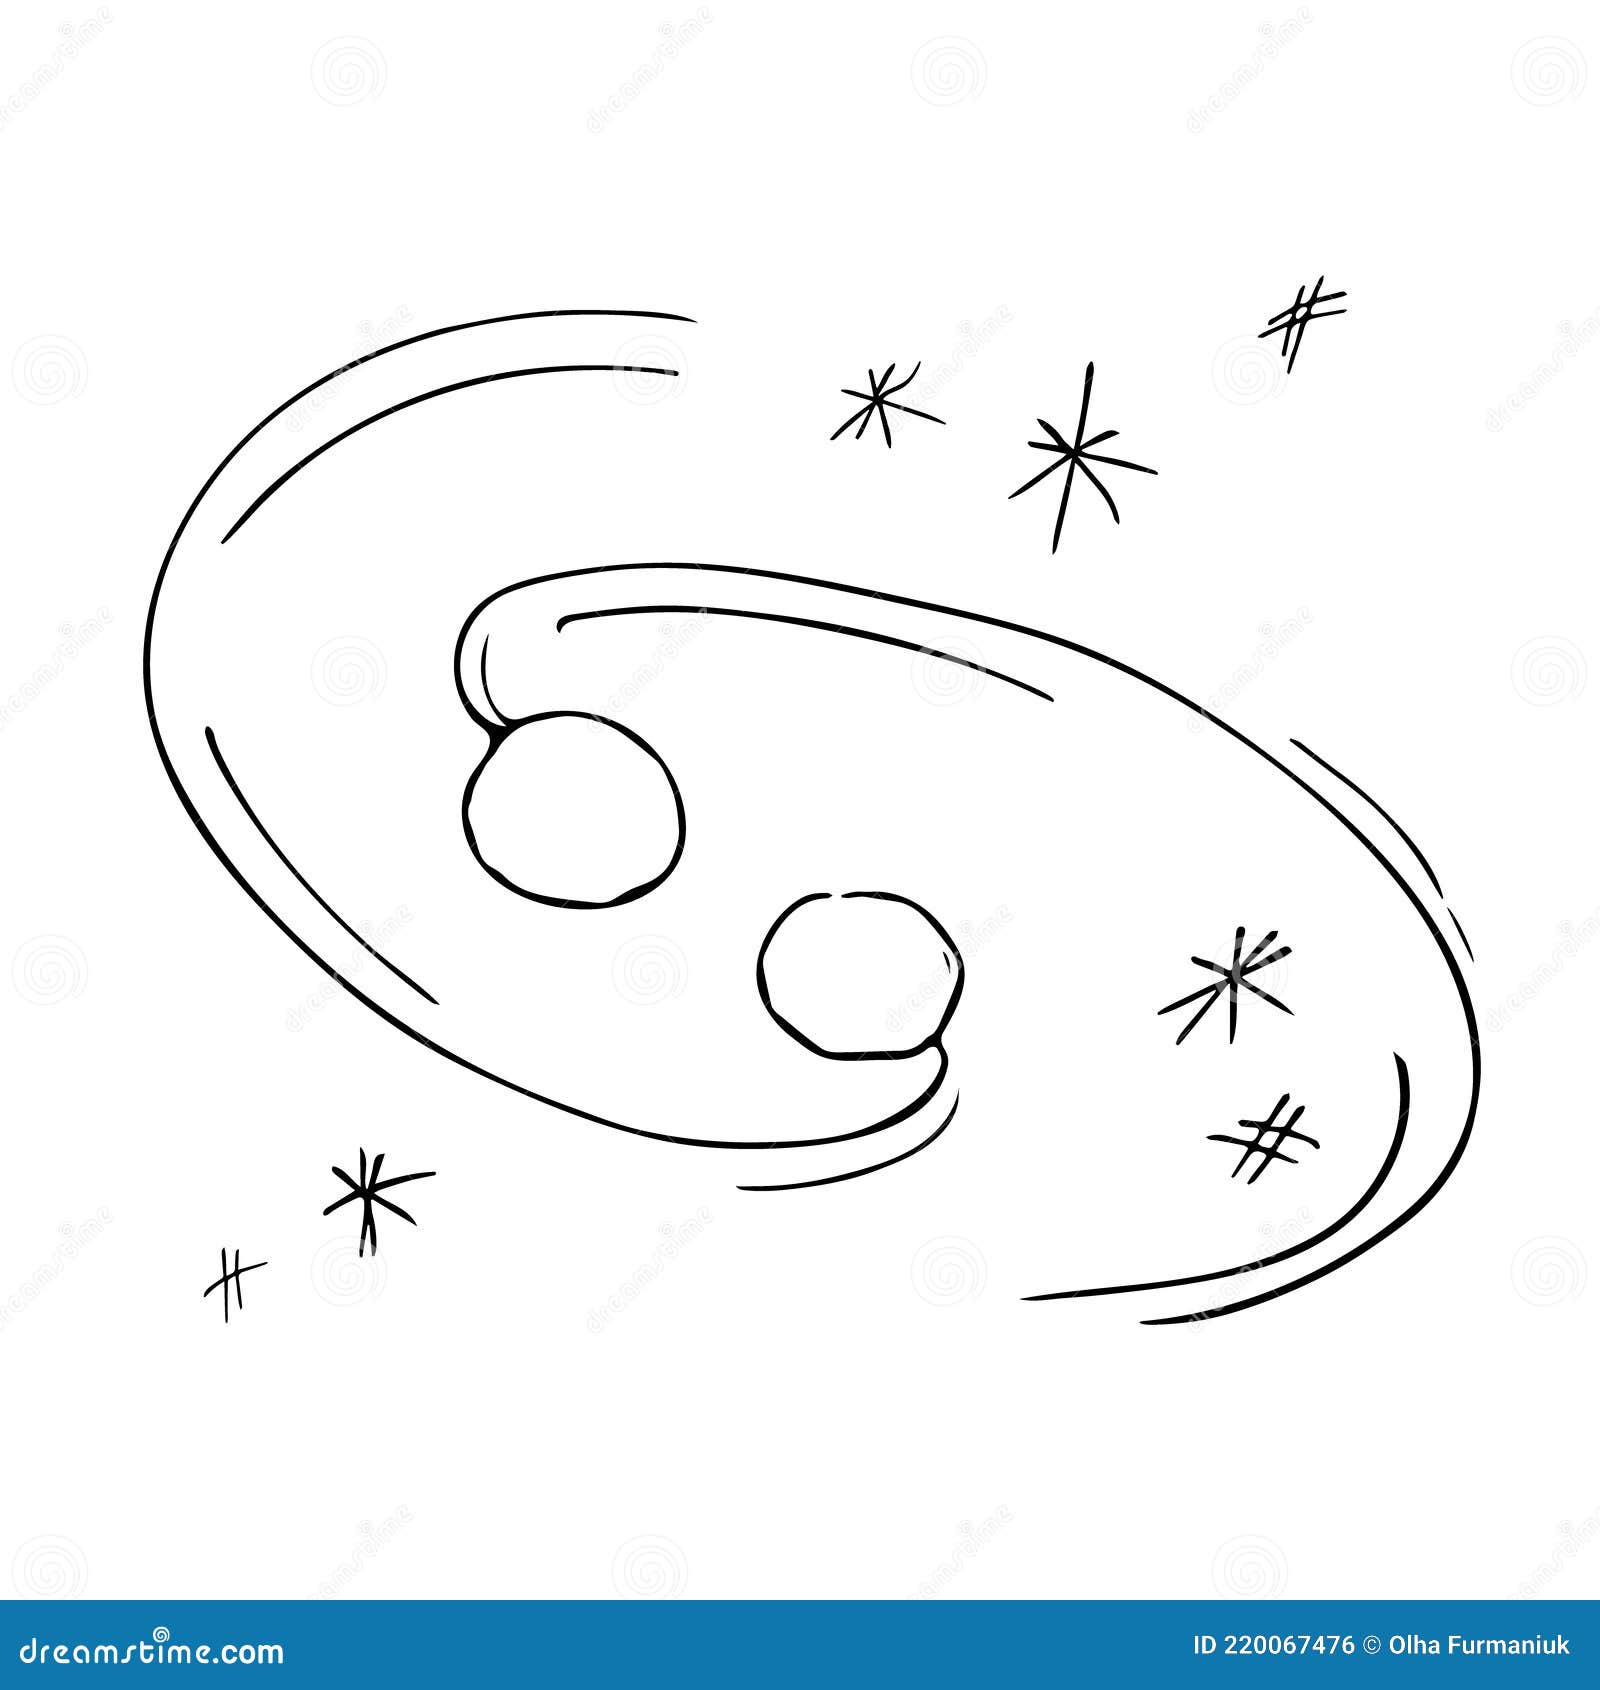 Space doodles sketch space planets hand drawn celestial bodies earth  sun and moon universe space planets vector  CanStock